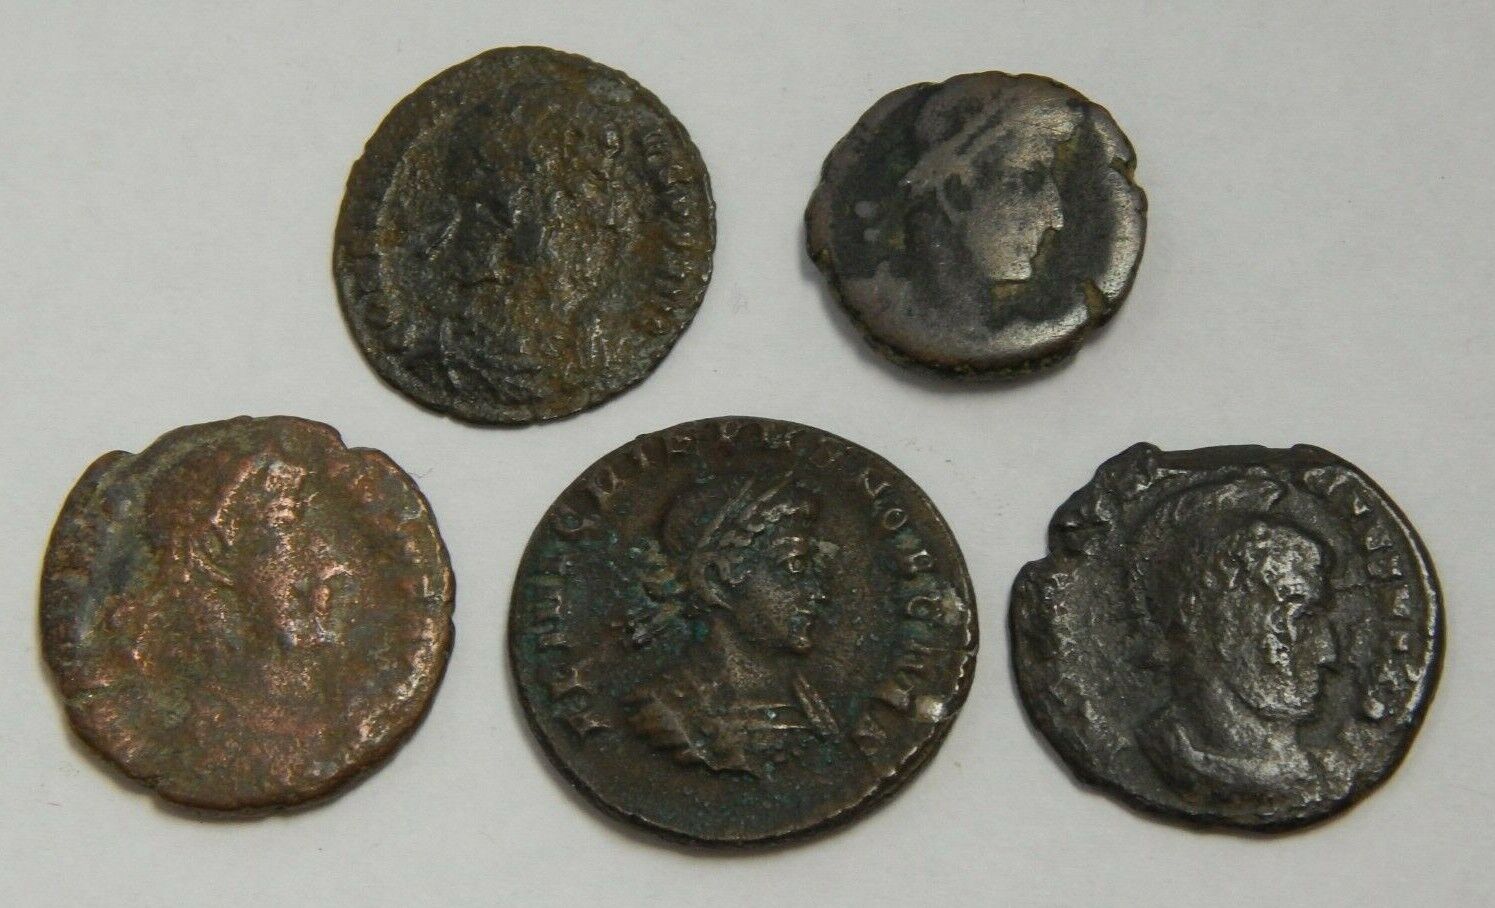 Lot of 5 - All Different - Ancient Roman Imperial Coins